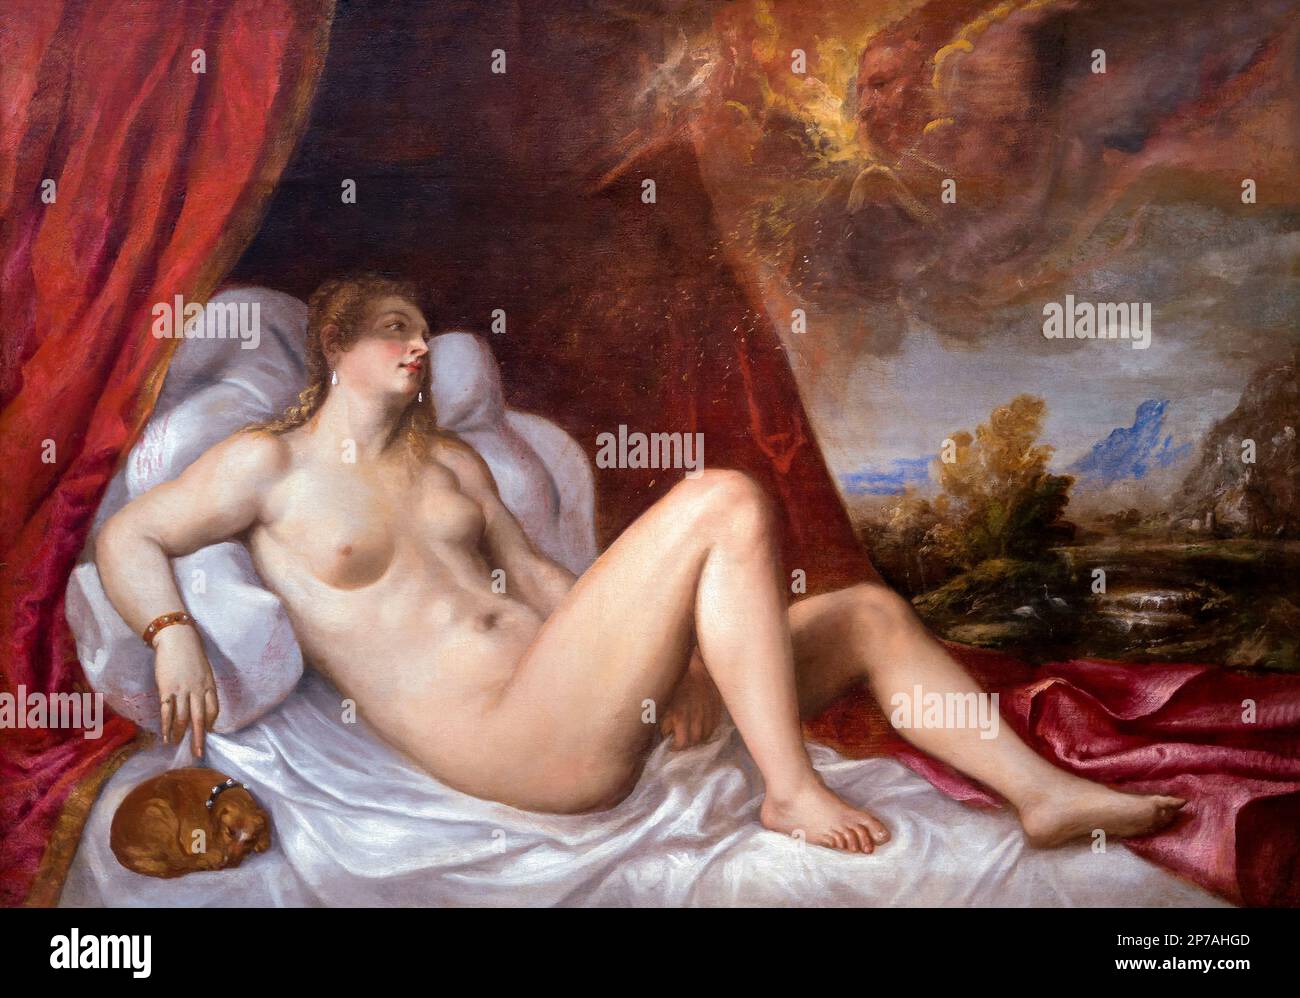 Danae, Titian, and workshop, after 1554, Art Institute of Chicago, Chicago, Illinois, USA, North America, Stock Photo